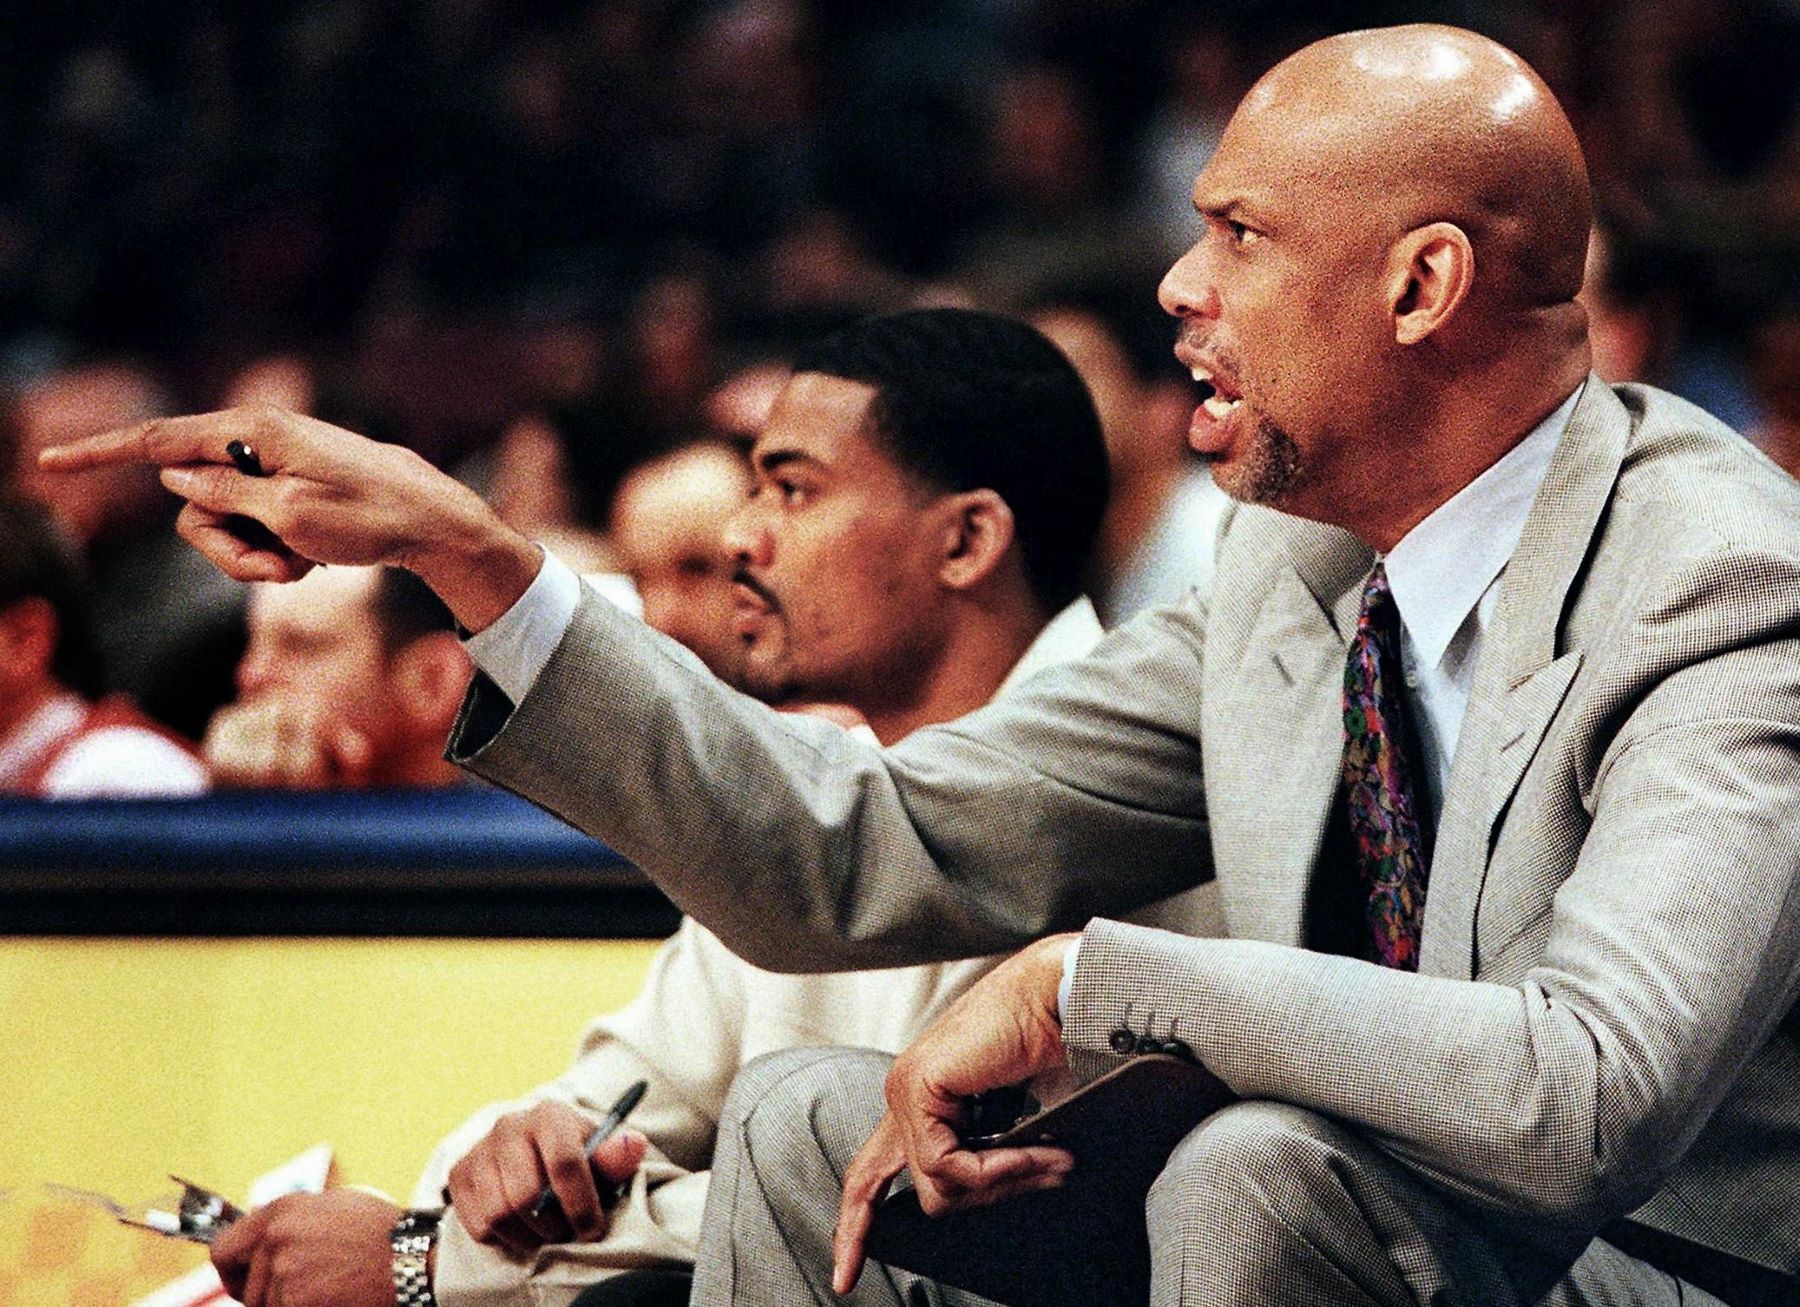 Los Angeles Lakers Assistant Coach Kareem Abdul-Jabbar during a game against the New York Nicks at Madison Square Garden